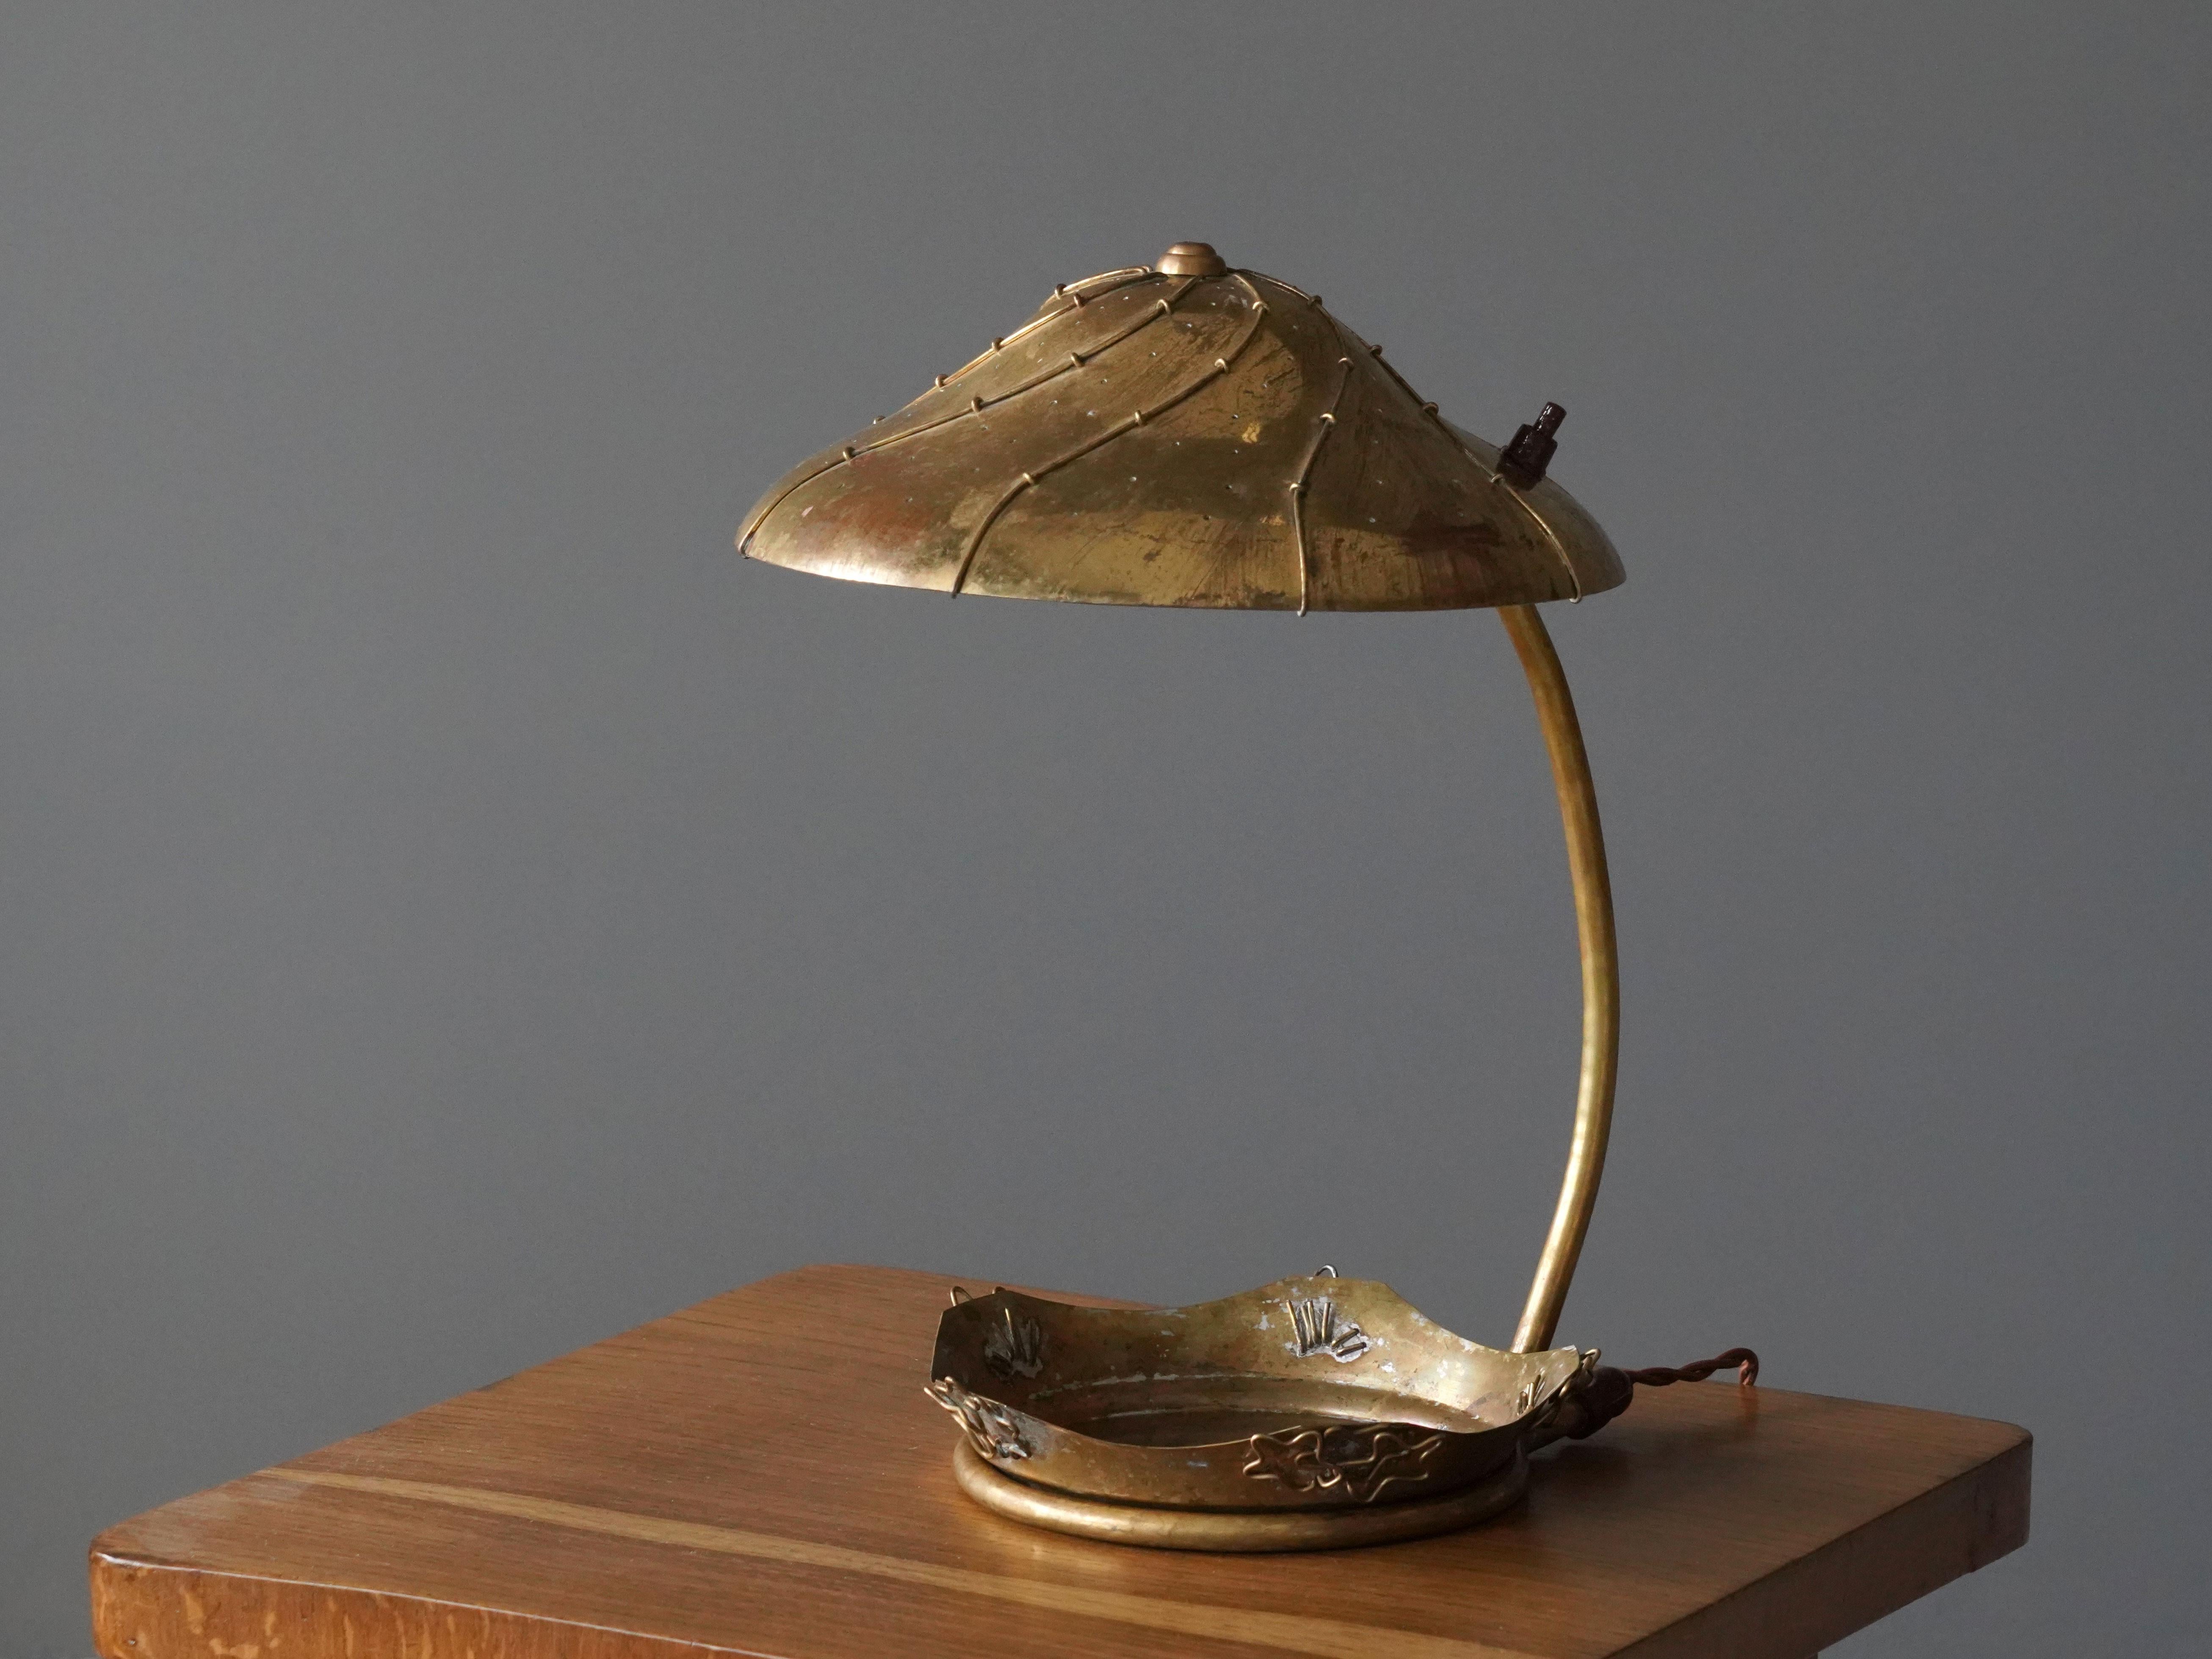 A modernist and organic table lamp. Designed by an unknown Finnish designer. The small tray is removable and can be flipped upside down and placed beneath the lamp as a riser. 

Other Finnish designers of the era include Paavo Tynell, Lisa